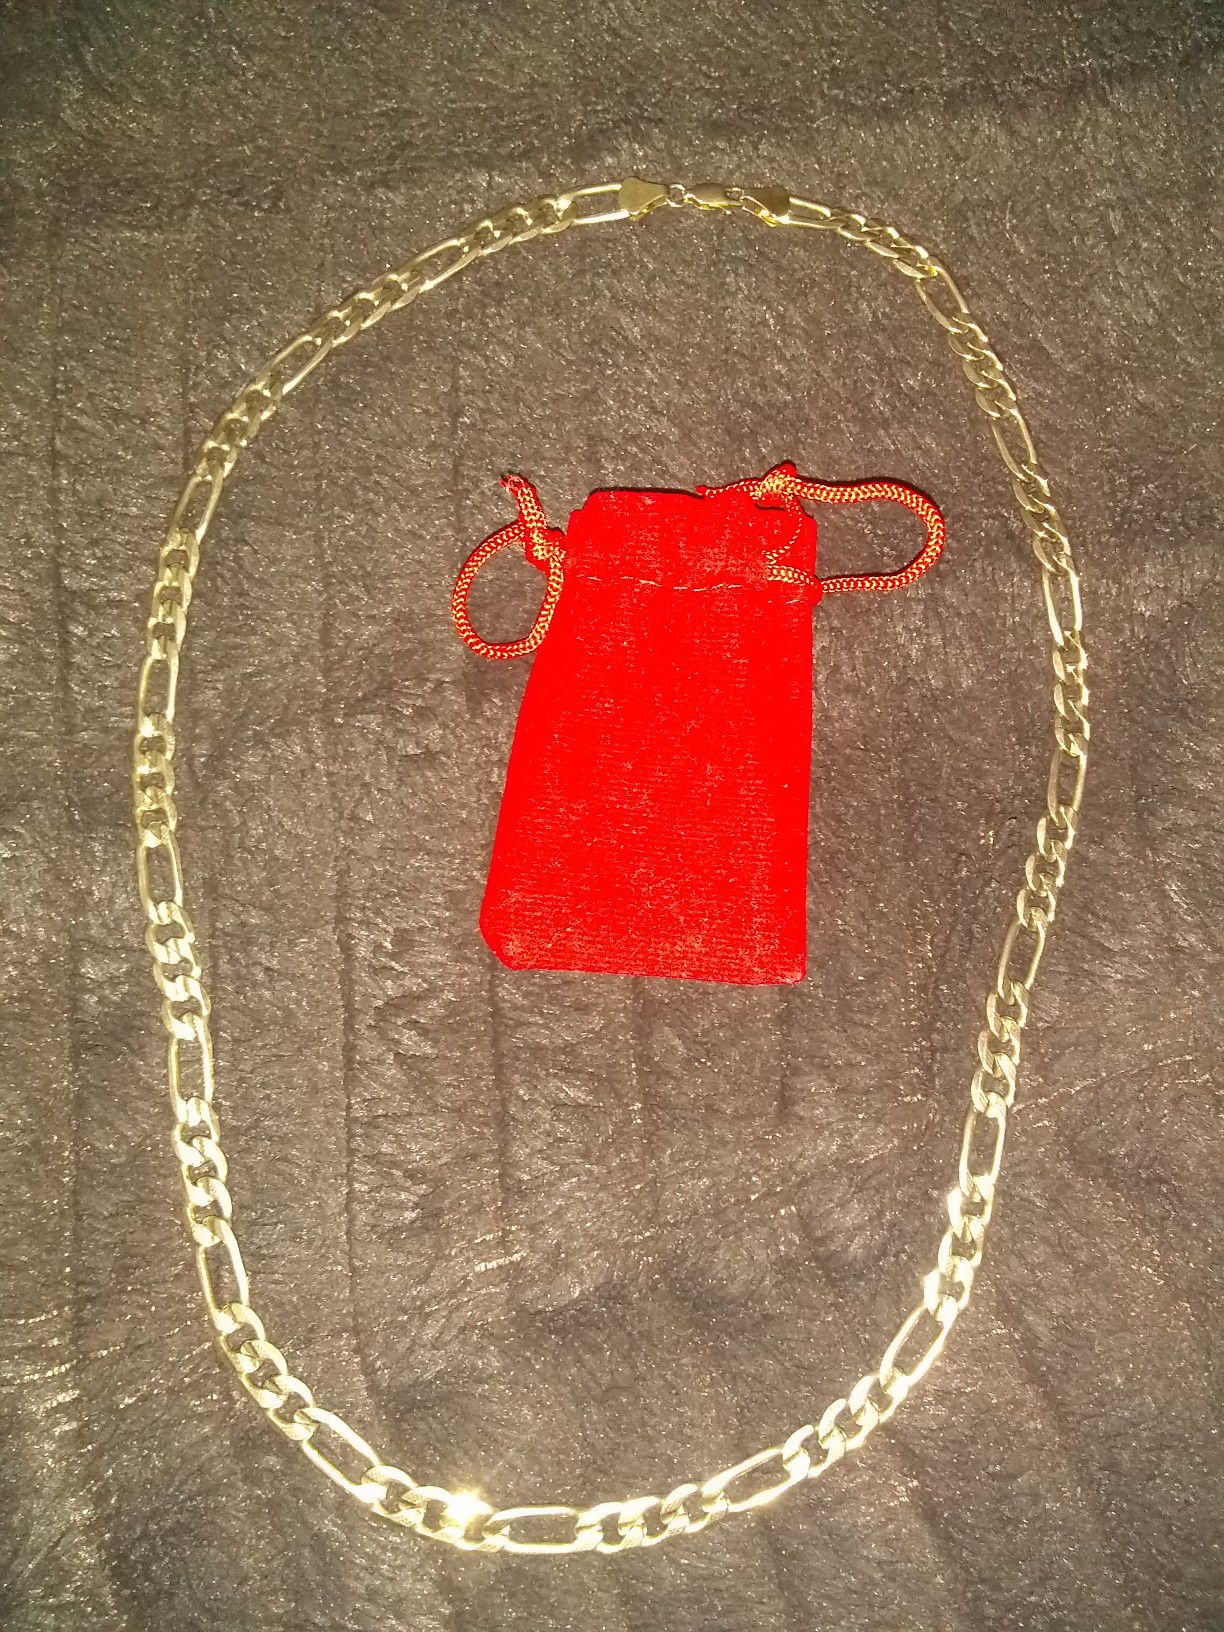 18k ((GOLD PLATED)) Chain $10 FIRM